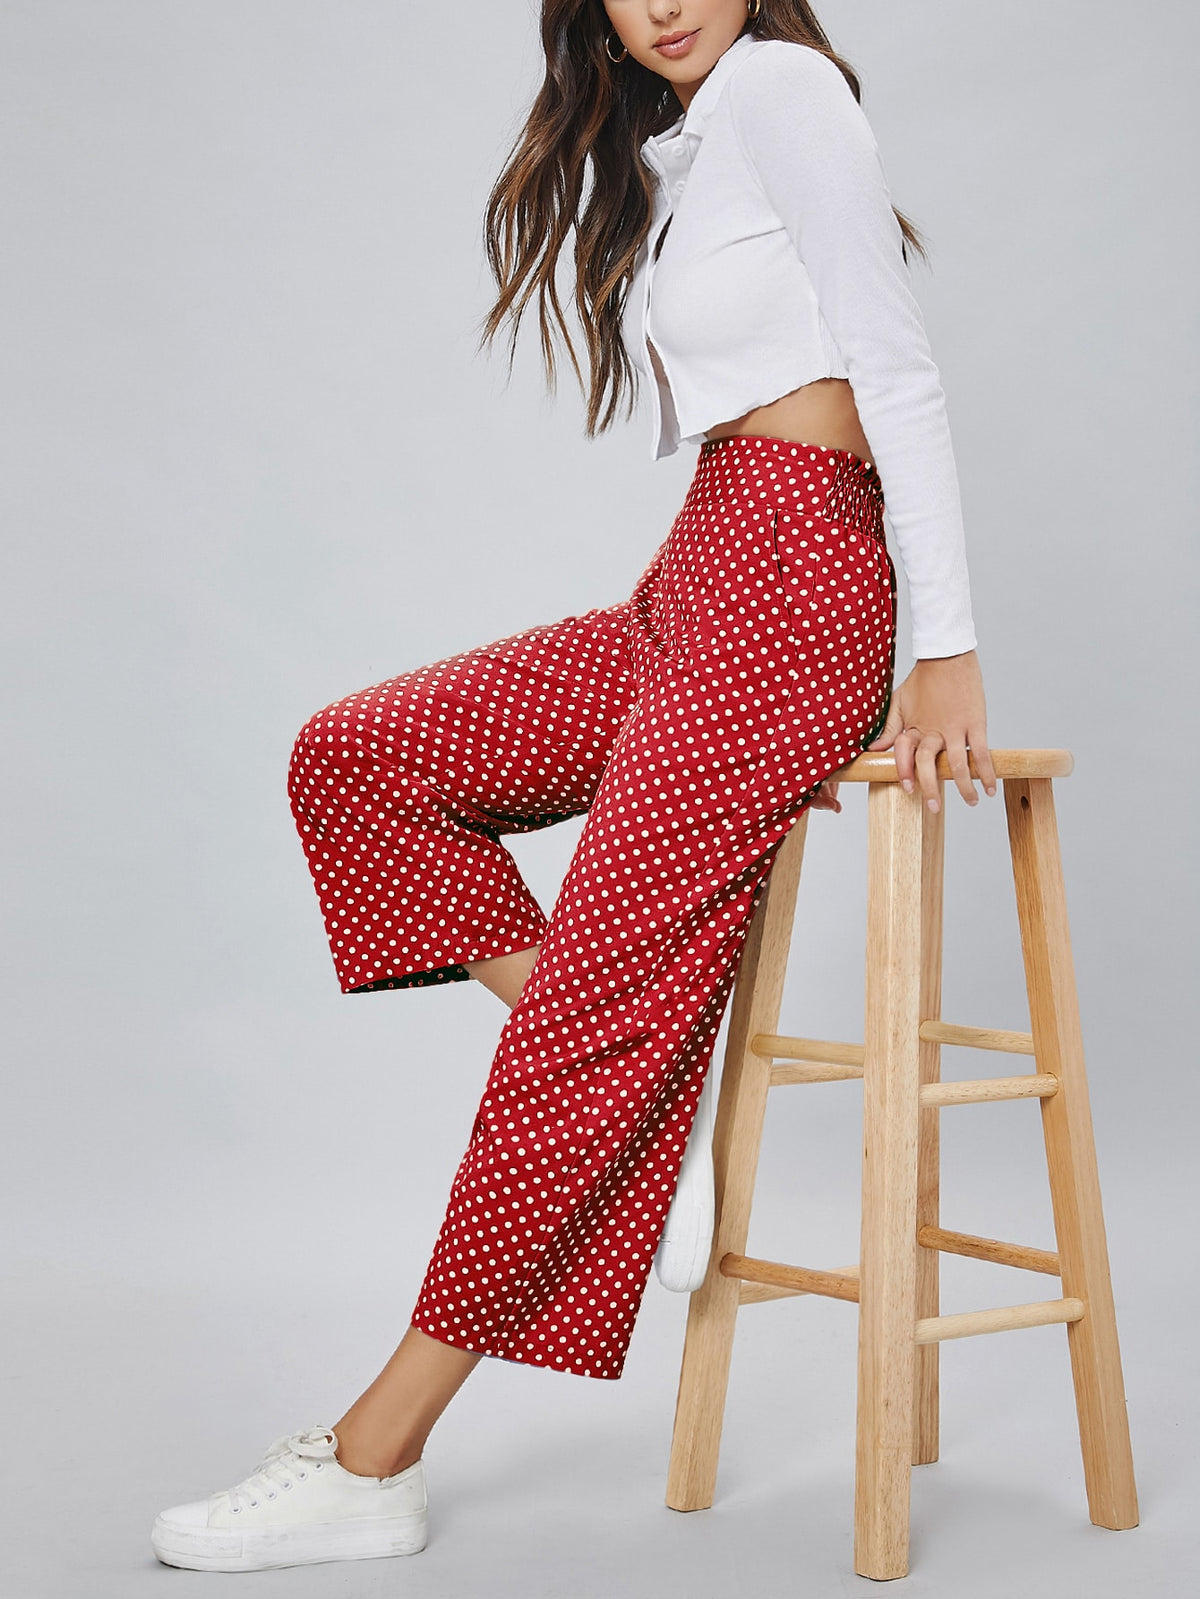 Cropped Polka Dot Pants - Red and White / L